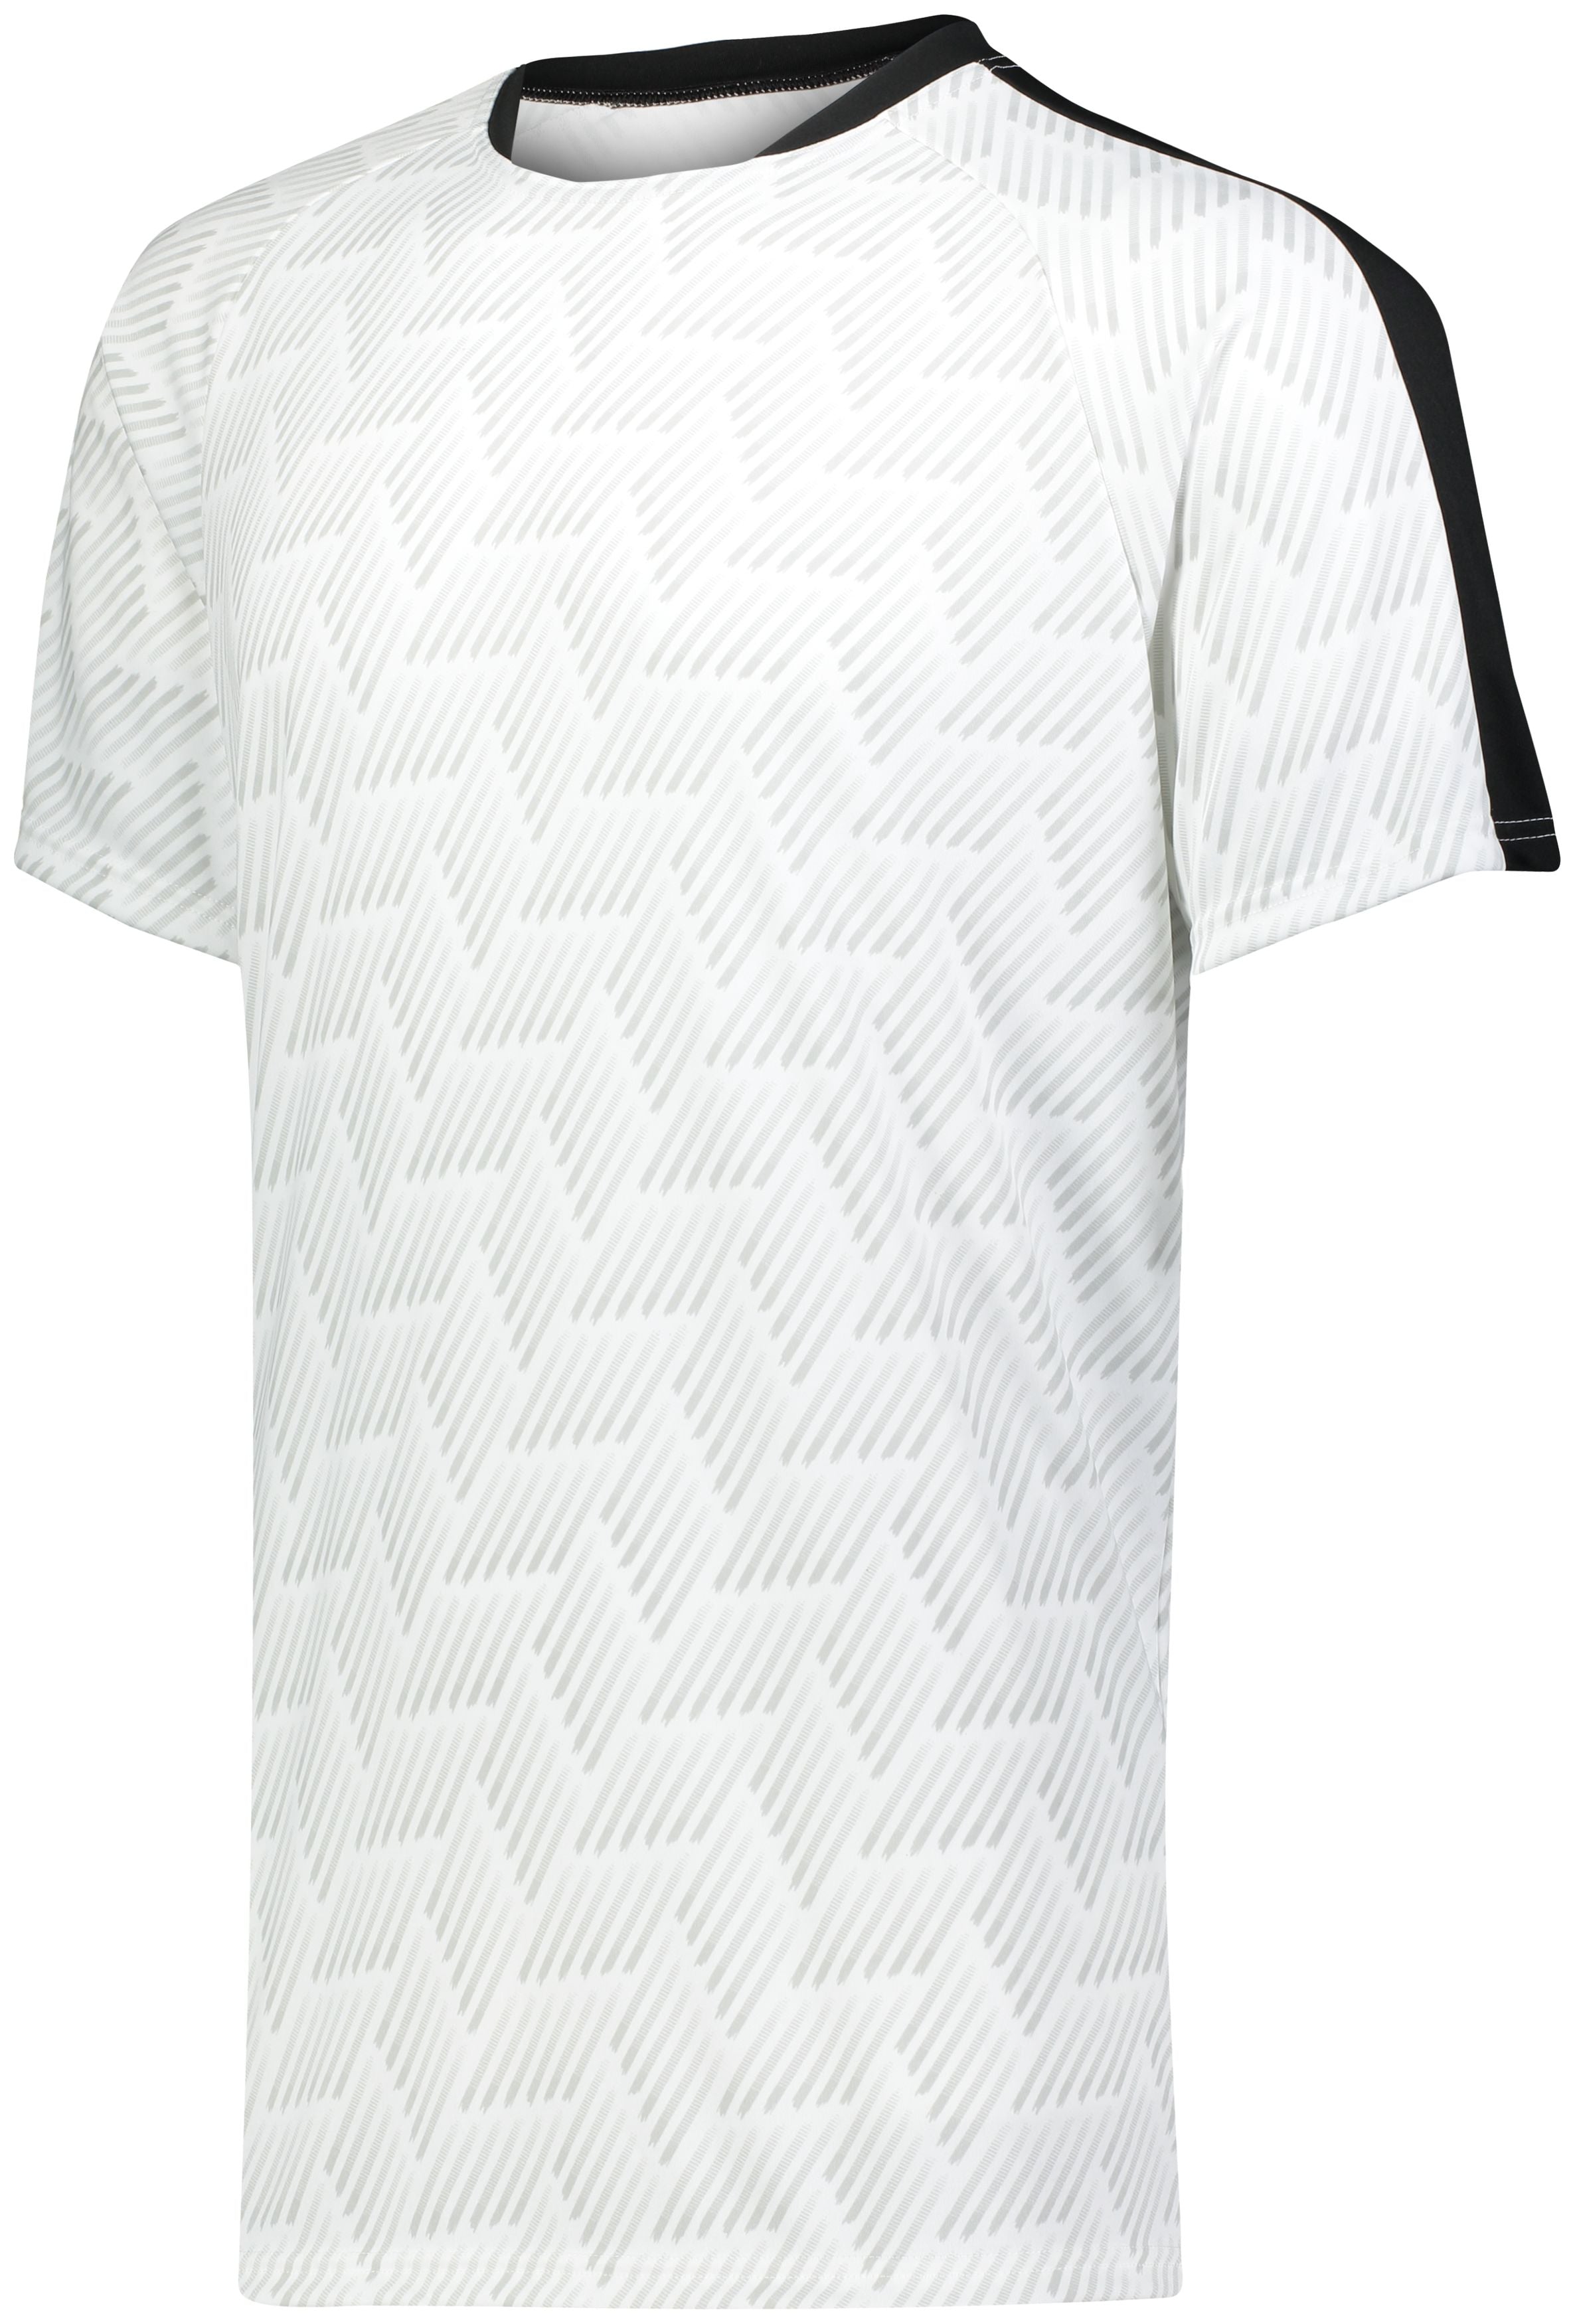 High 5 Youth Hypervolt Jersey in White Print/Black  -Part of the Youth, Youth-Jersey, High5-Products, Soccer, Shirts, All-Sports-1 product lines at KanaleyCreations.com